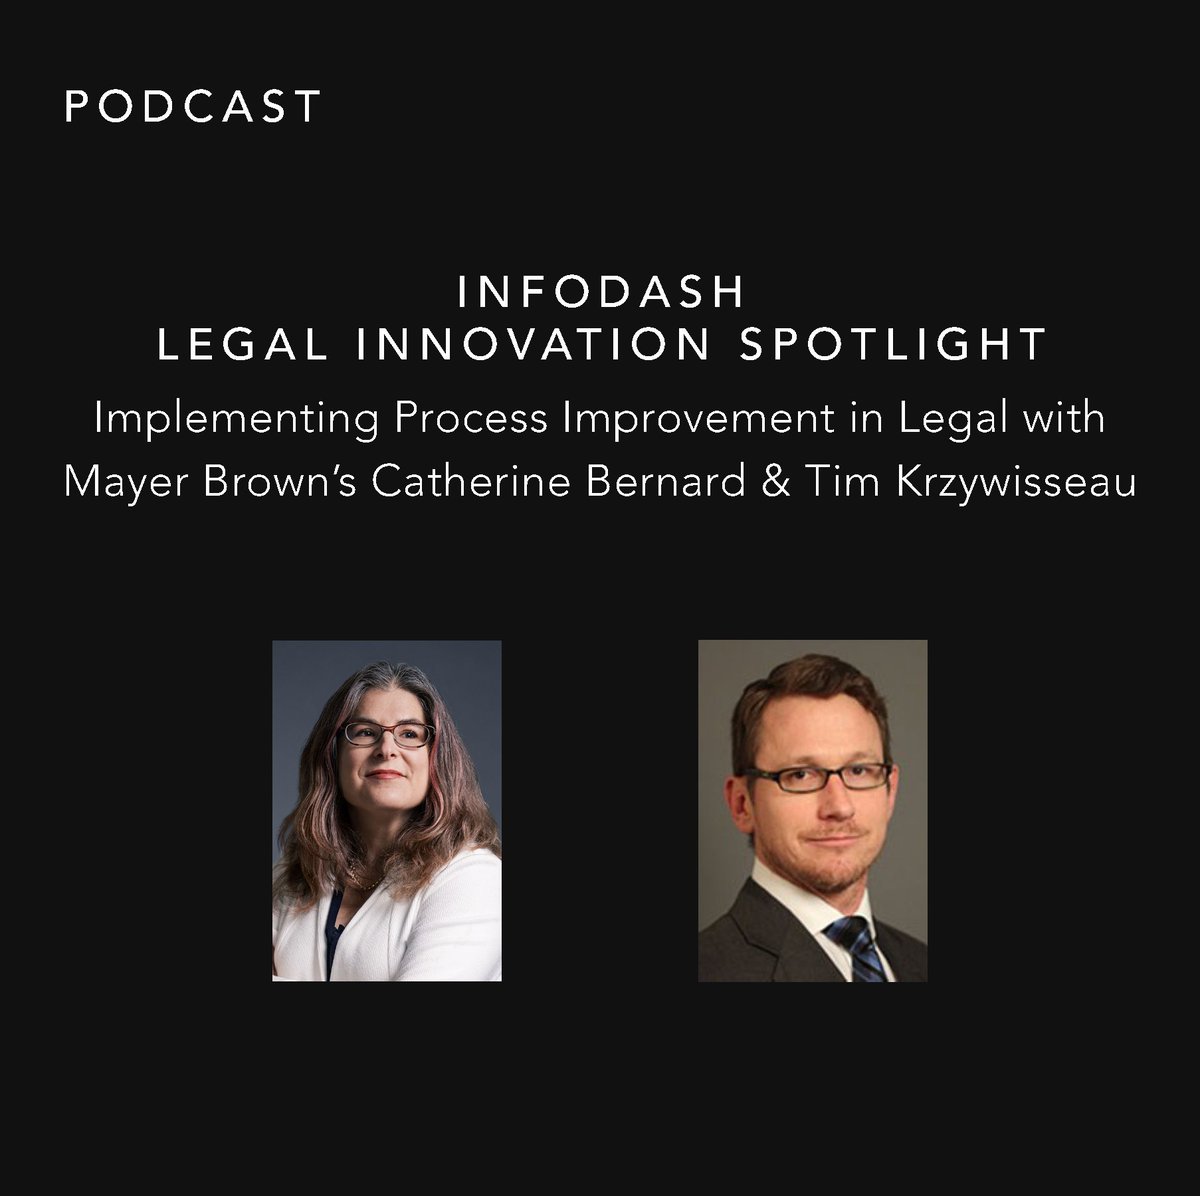 Catherine Bernard & Tim Krzywisseau join Ted Theodoropoulos of @getinfodash for the latest episode of Legal Innovation Spotlight youtu.be/oKbi9SxExeA?si…
#legalprocess #legalinnovation #knowledgemanagement